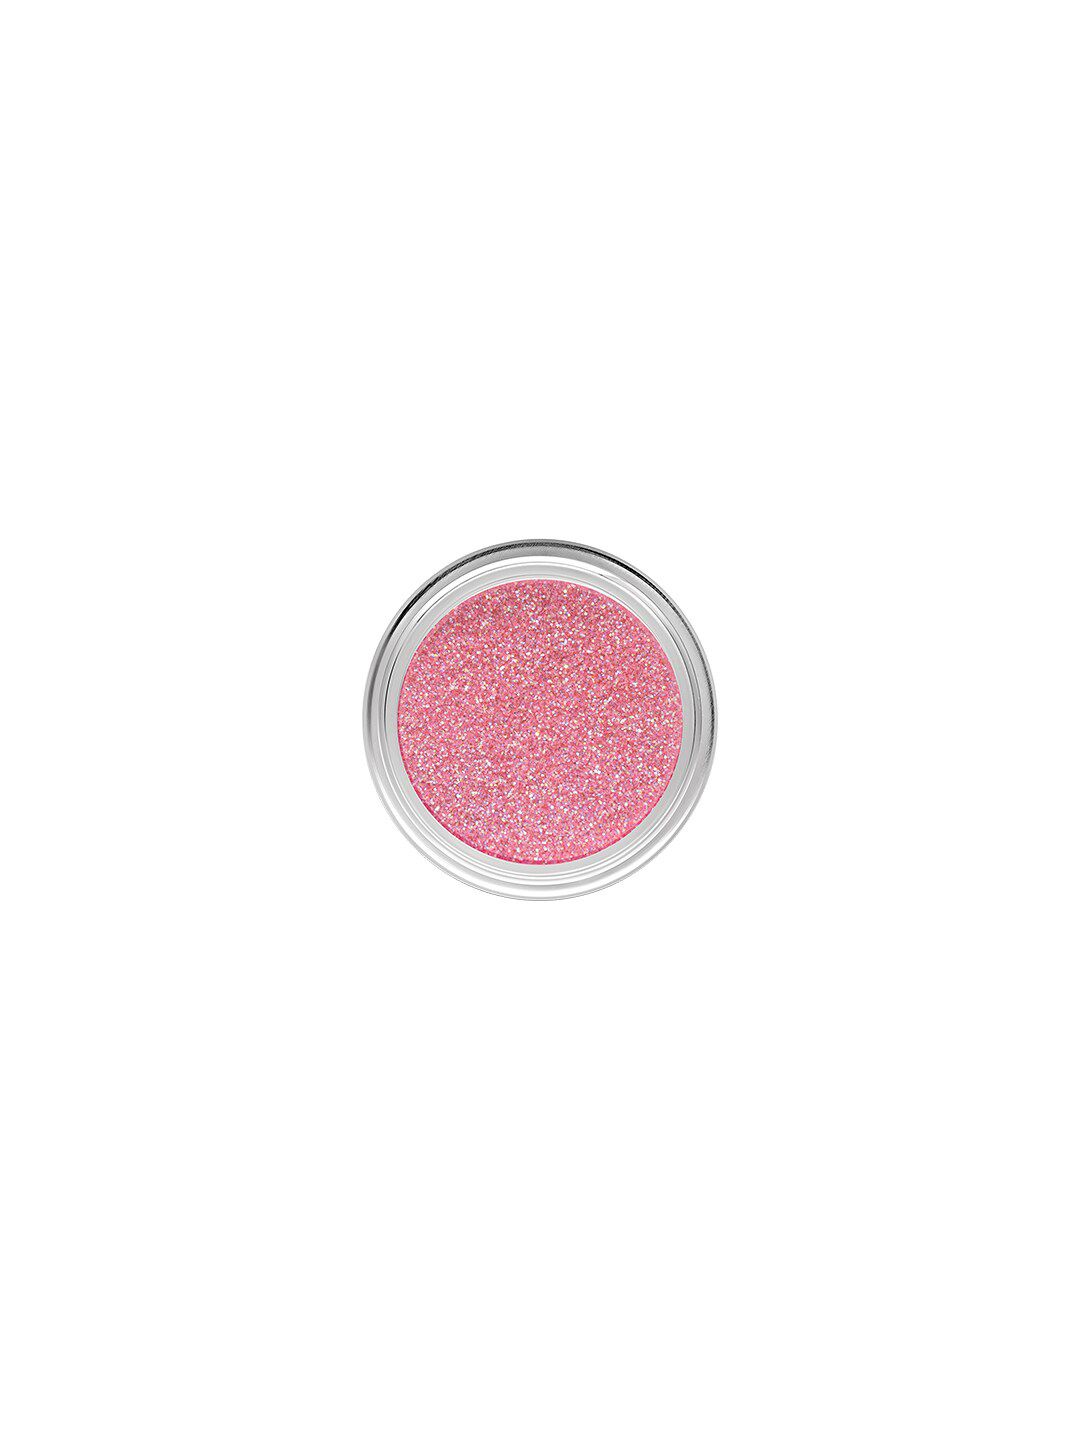 C2P PROFESSIONAL MAKEUP Uptown Loose Glitters Eyeshadow - Flashy Pink 30 Price in India